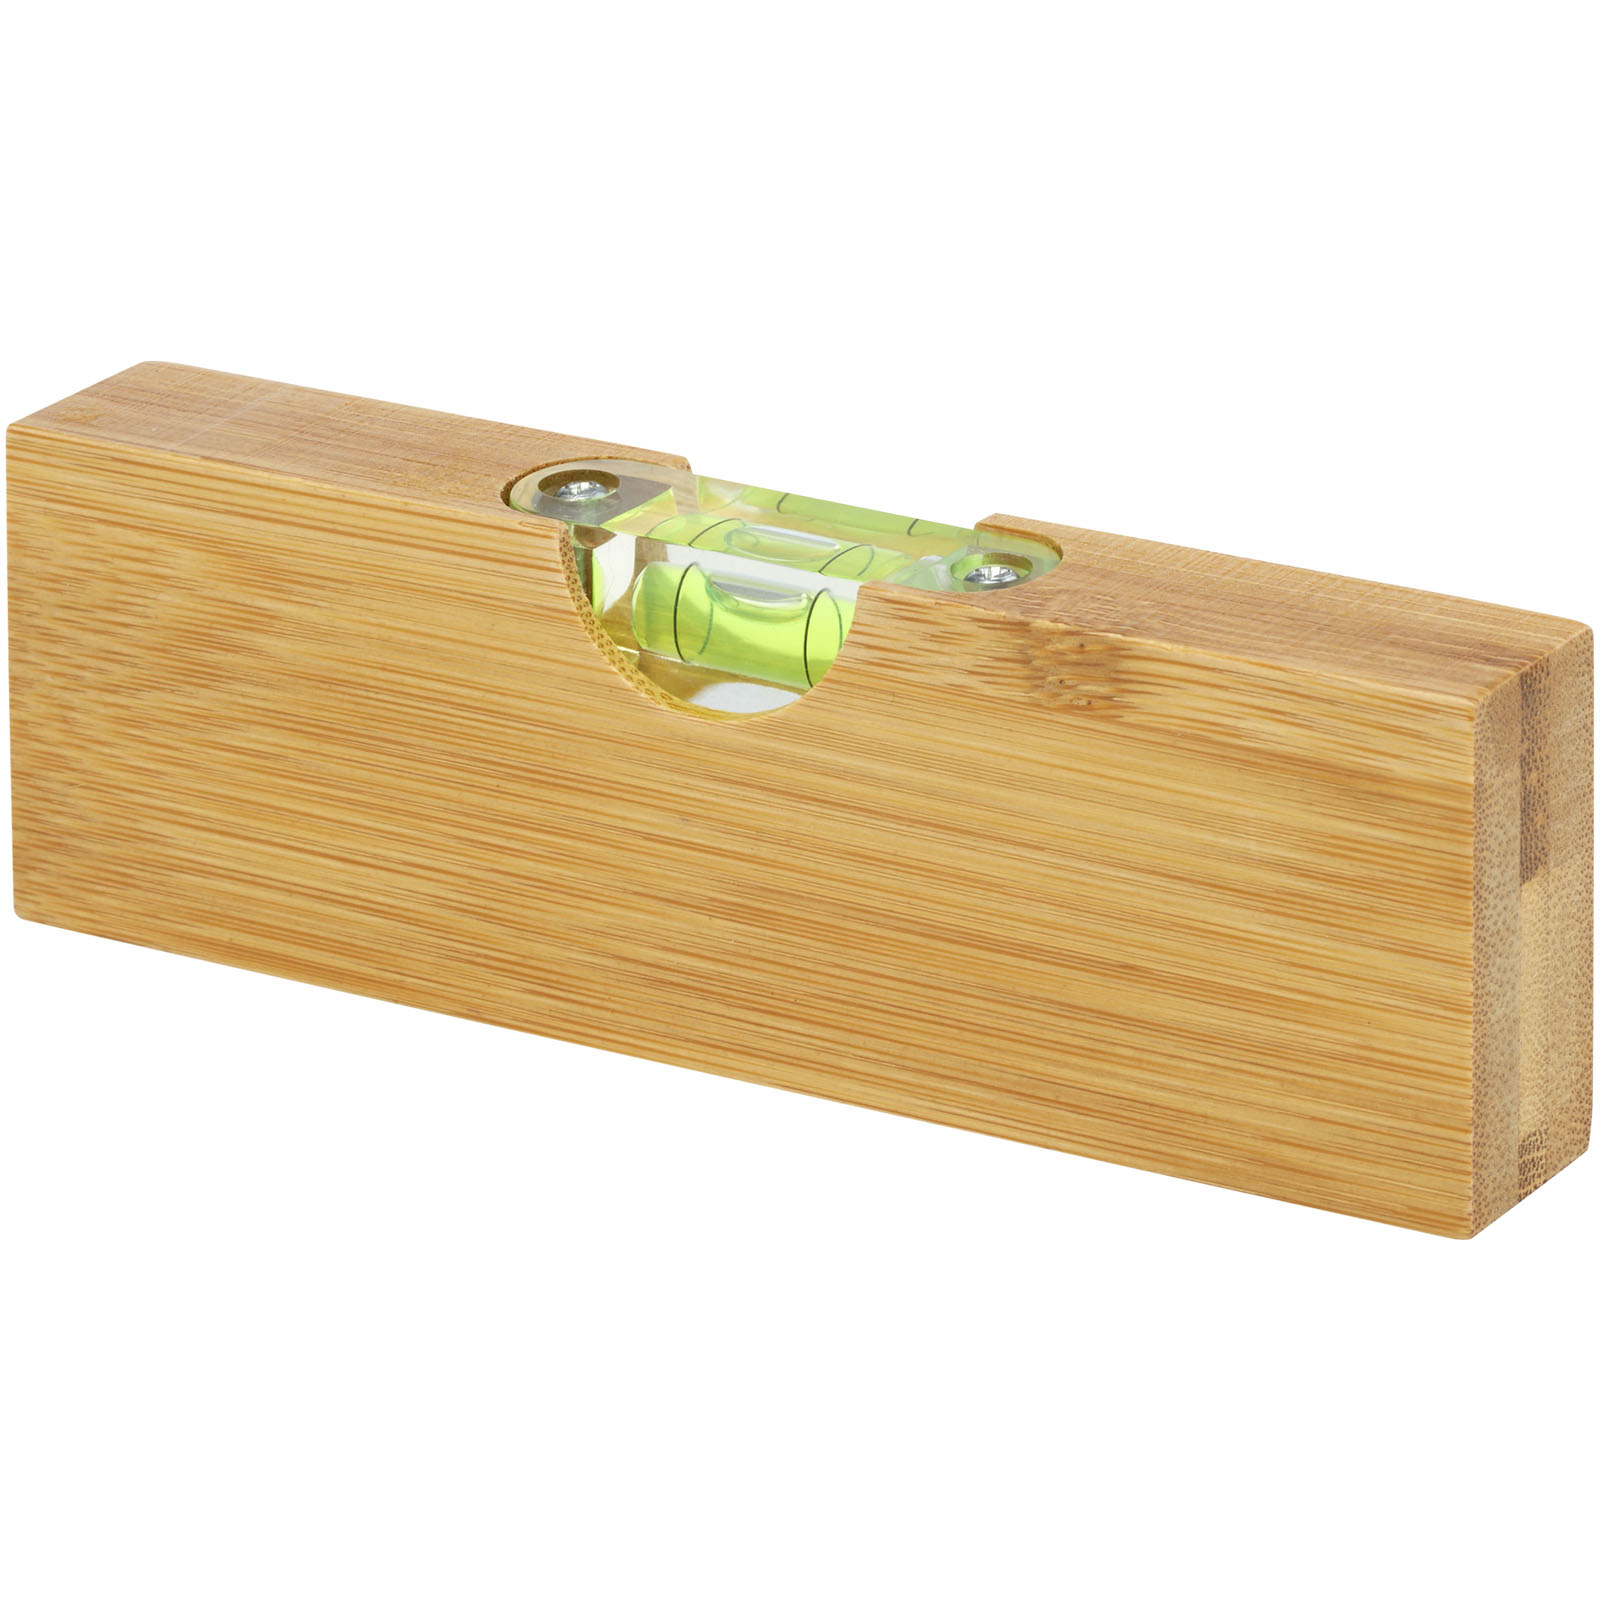 Tools & Car Accessories - Flush bamboo spirit level with bottle opener